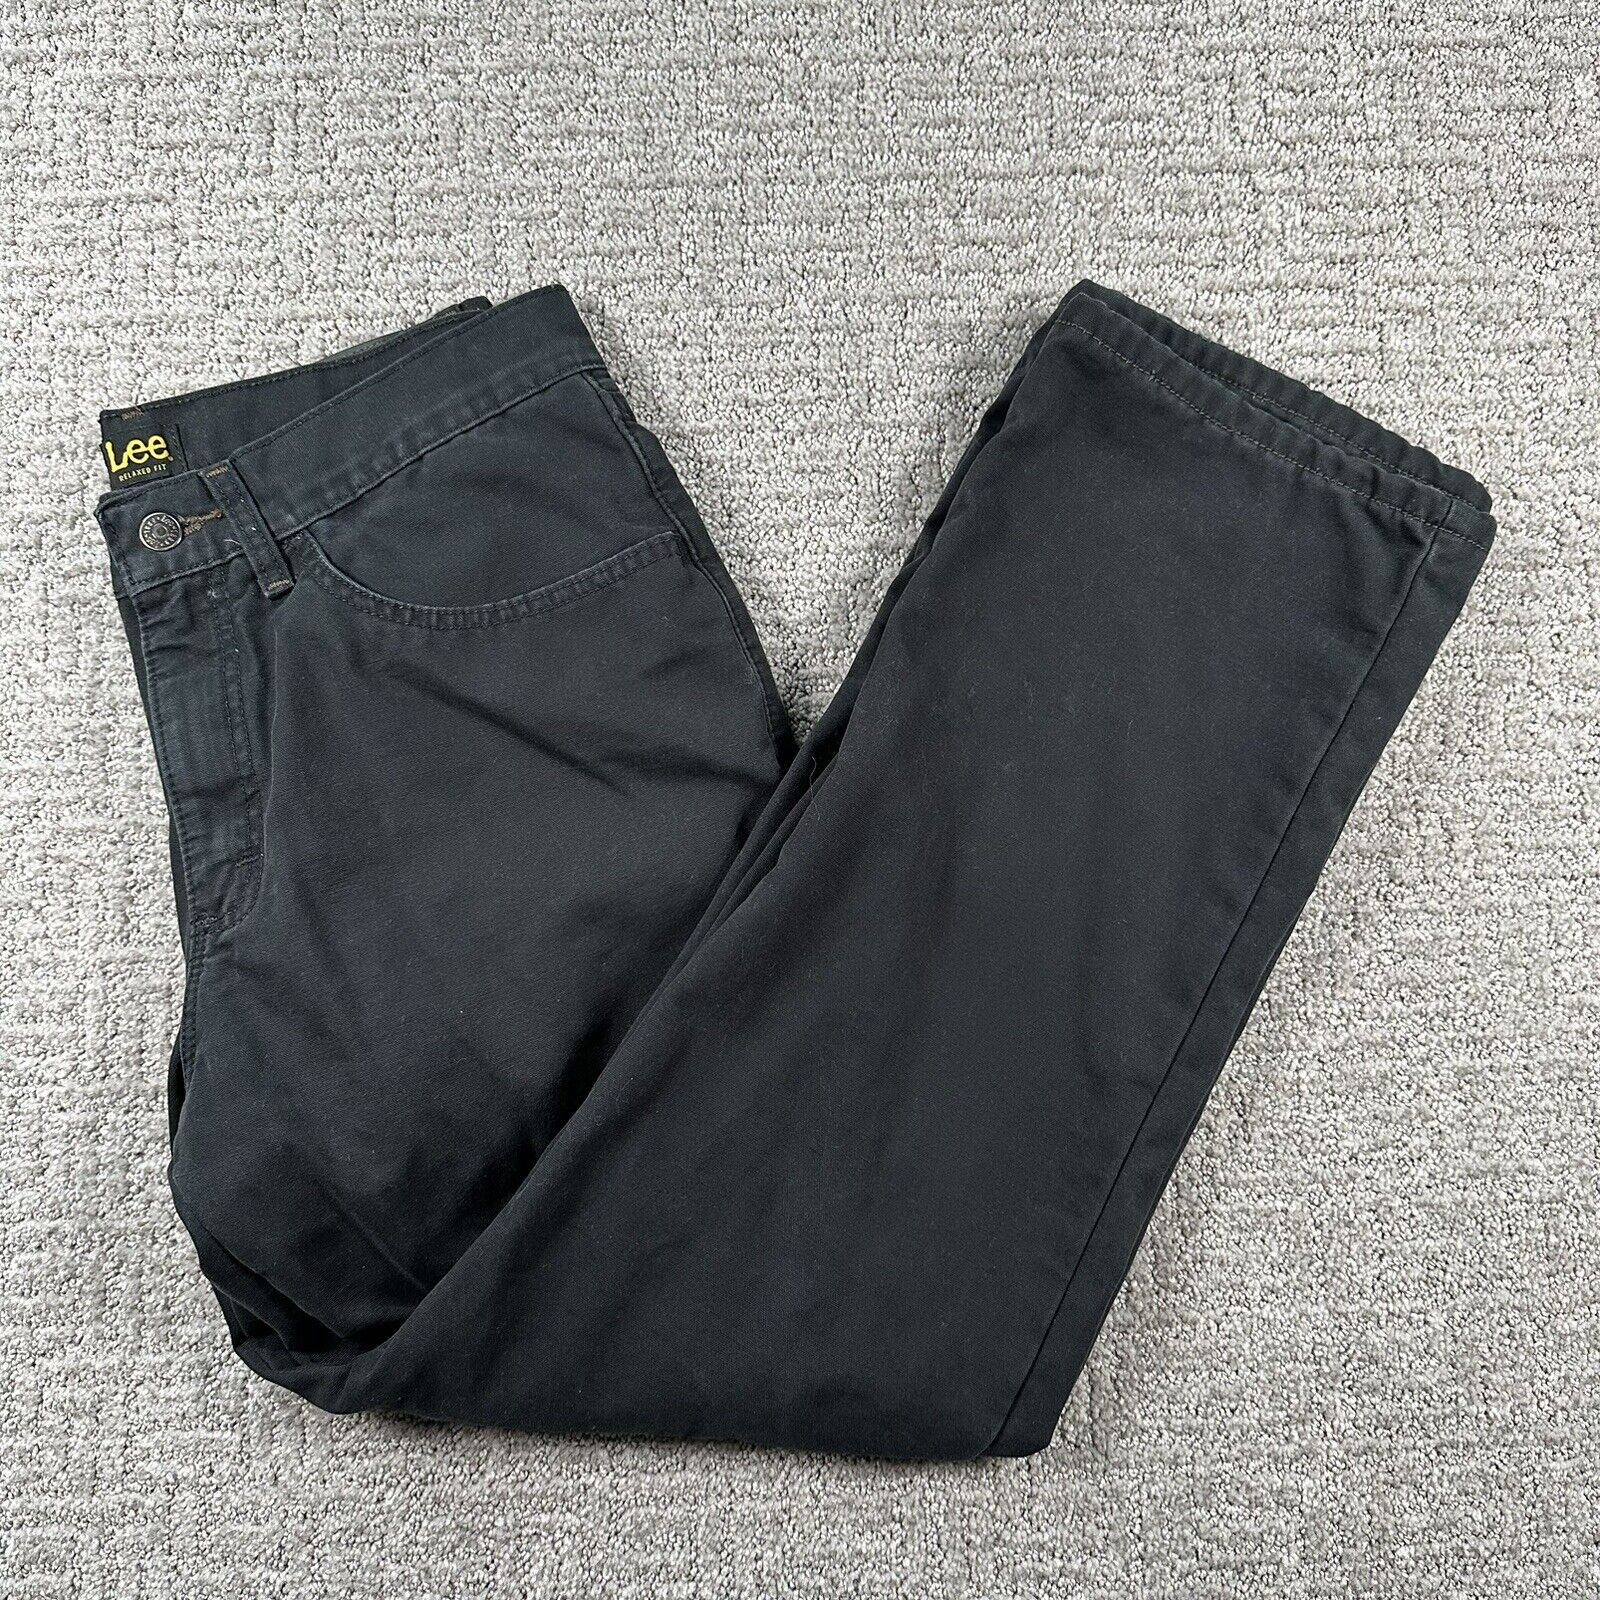 Lee Jeans 33 X 30 Black Denim Flannel Lined Straight Leg Relaxed Fit Pants  Mens | eBay